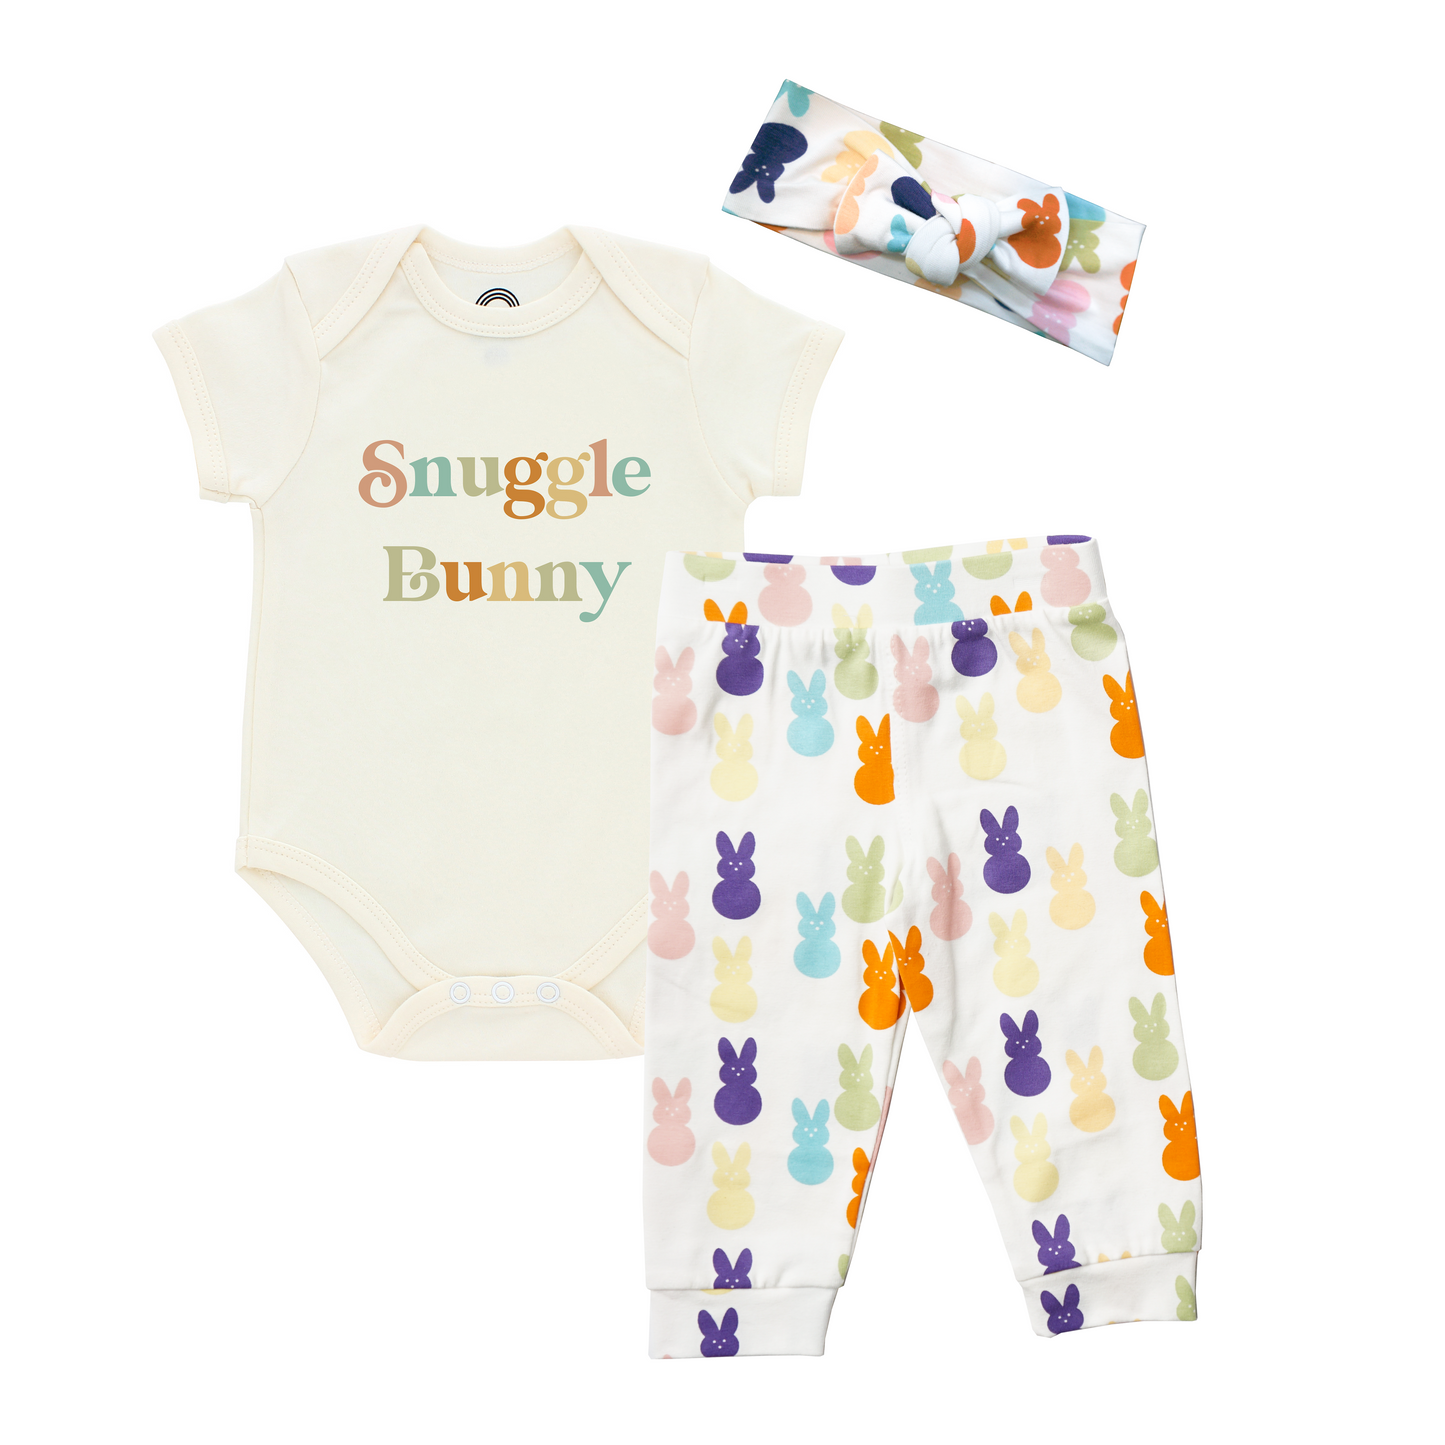 *FINAL SALE* Snuggle Bunny Easter Cotton Baby Onesie Set